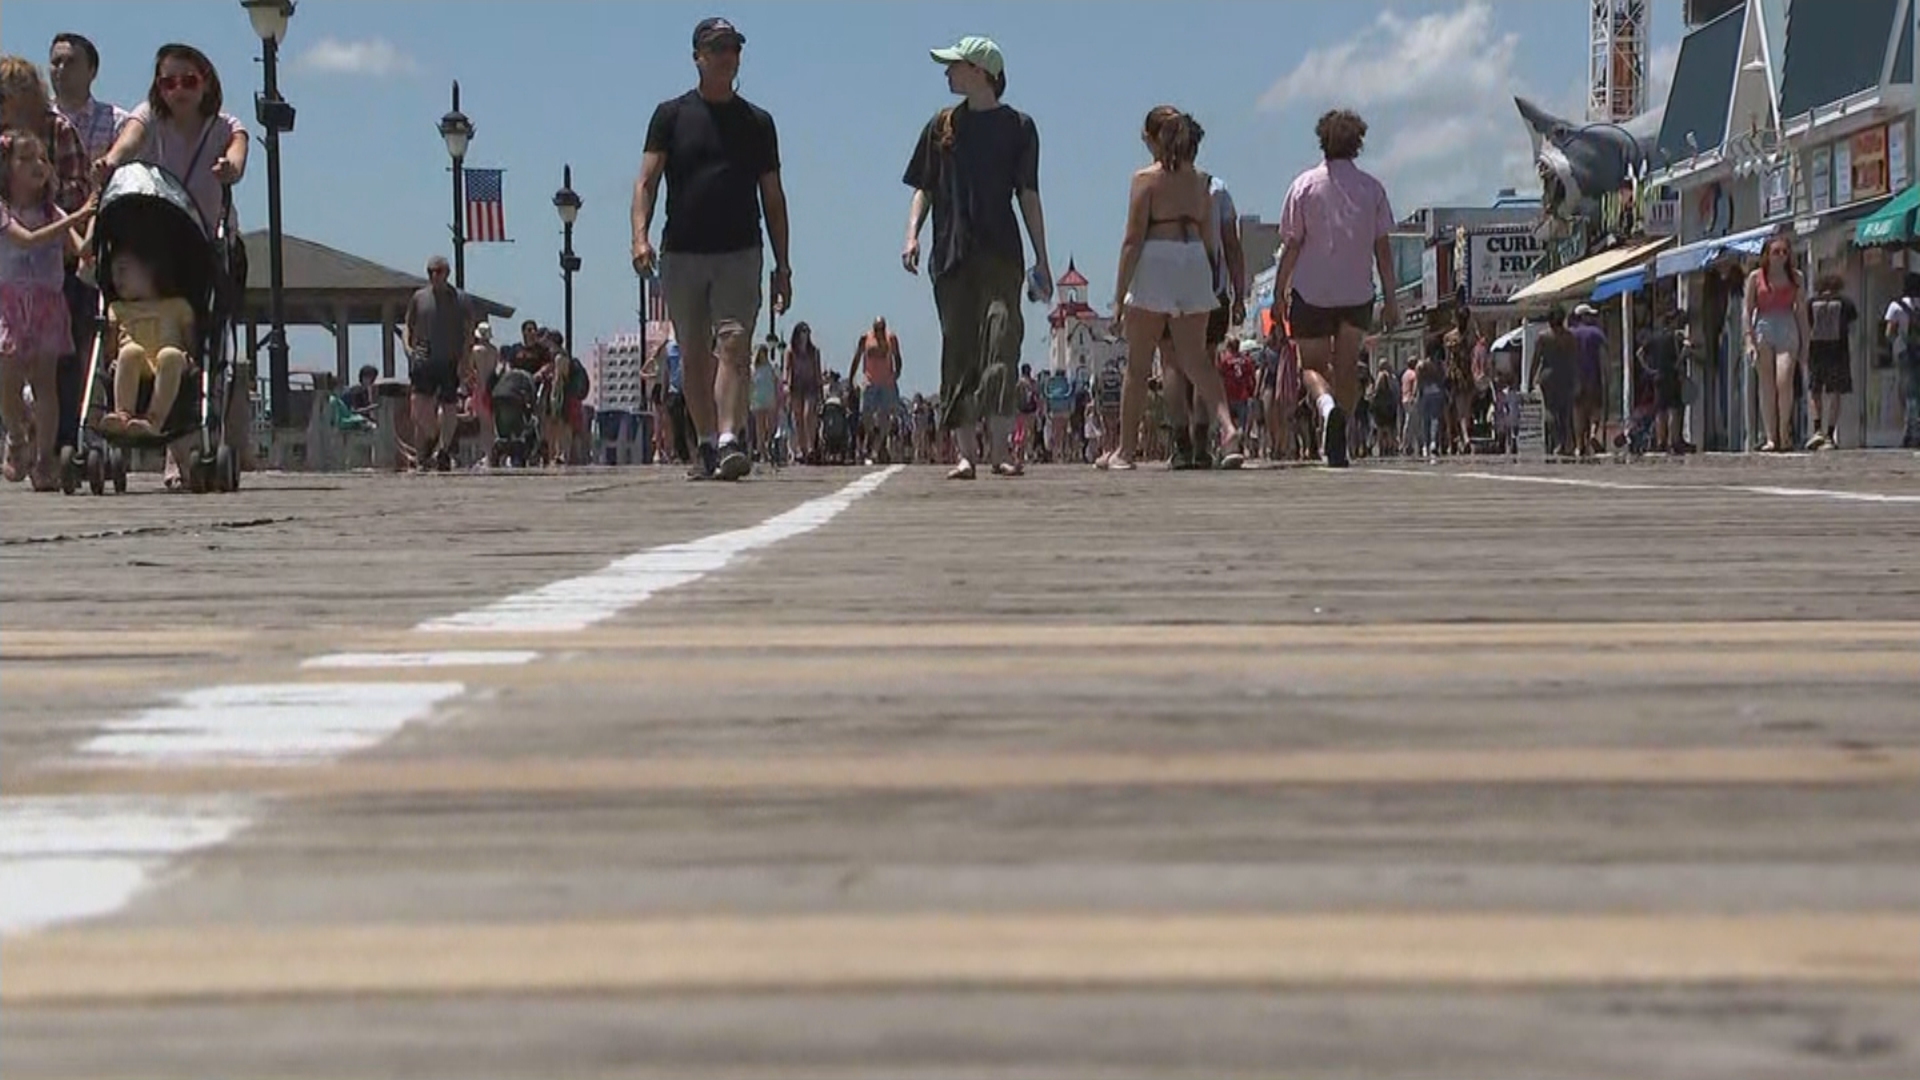 Business Is Booming At Ocean City's Boardwalk On Memorial Day Weekend: 'It’s So Gorgeous Out'